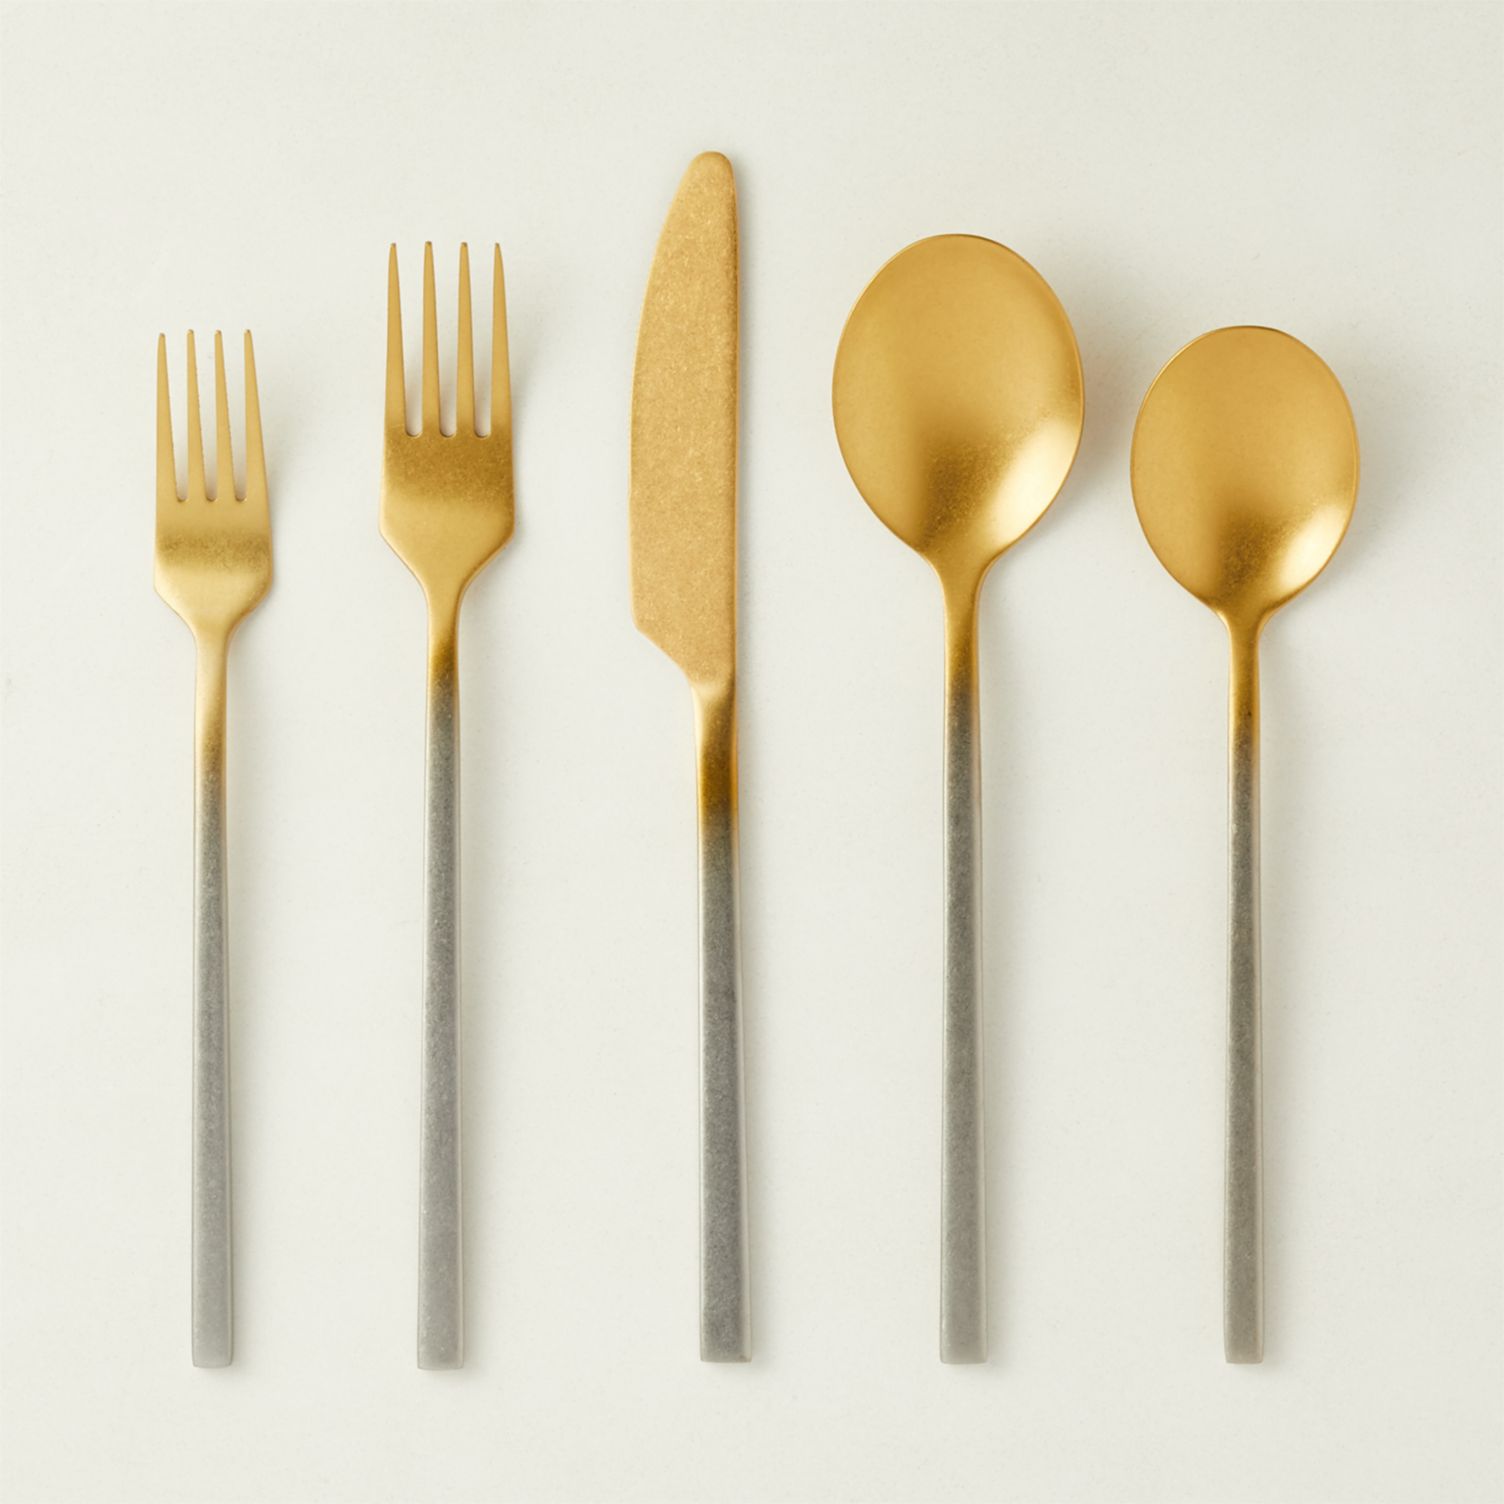 Gold-and-silver-flatware-set-with-faded-effect-37906